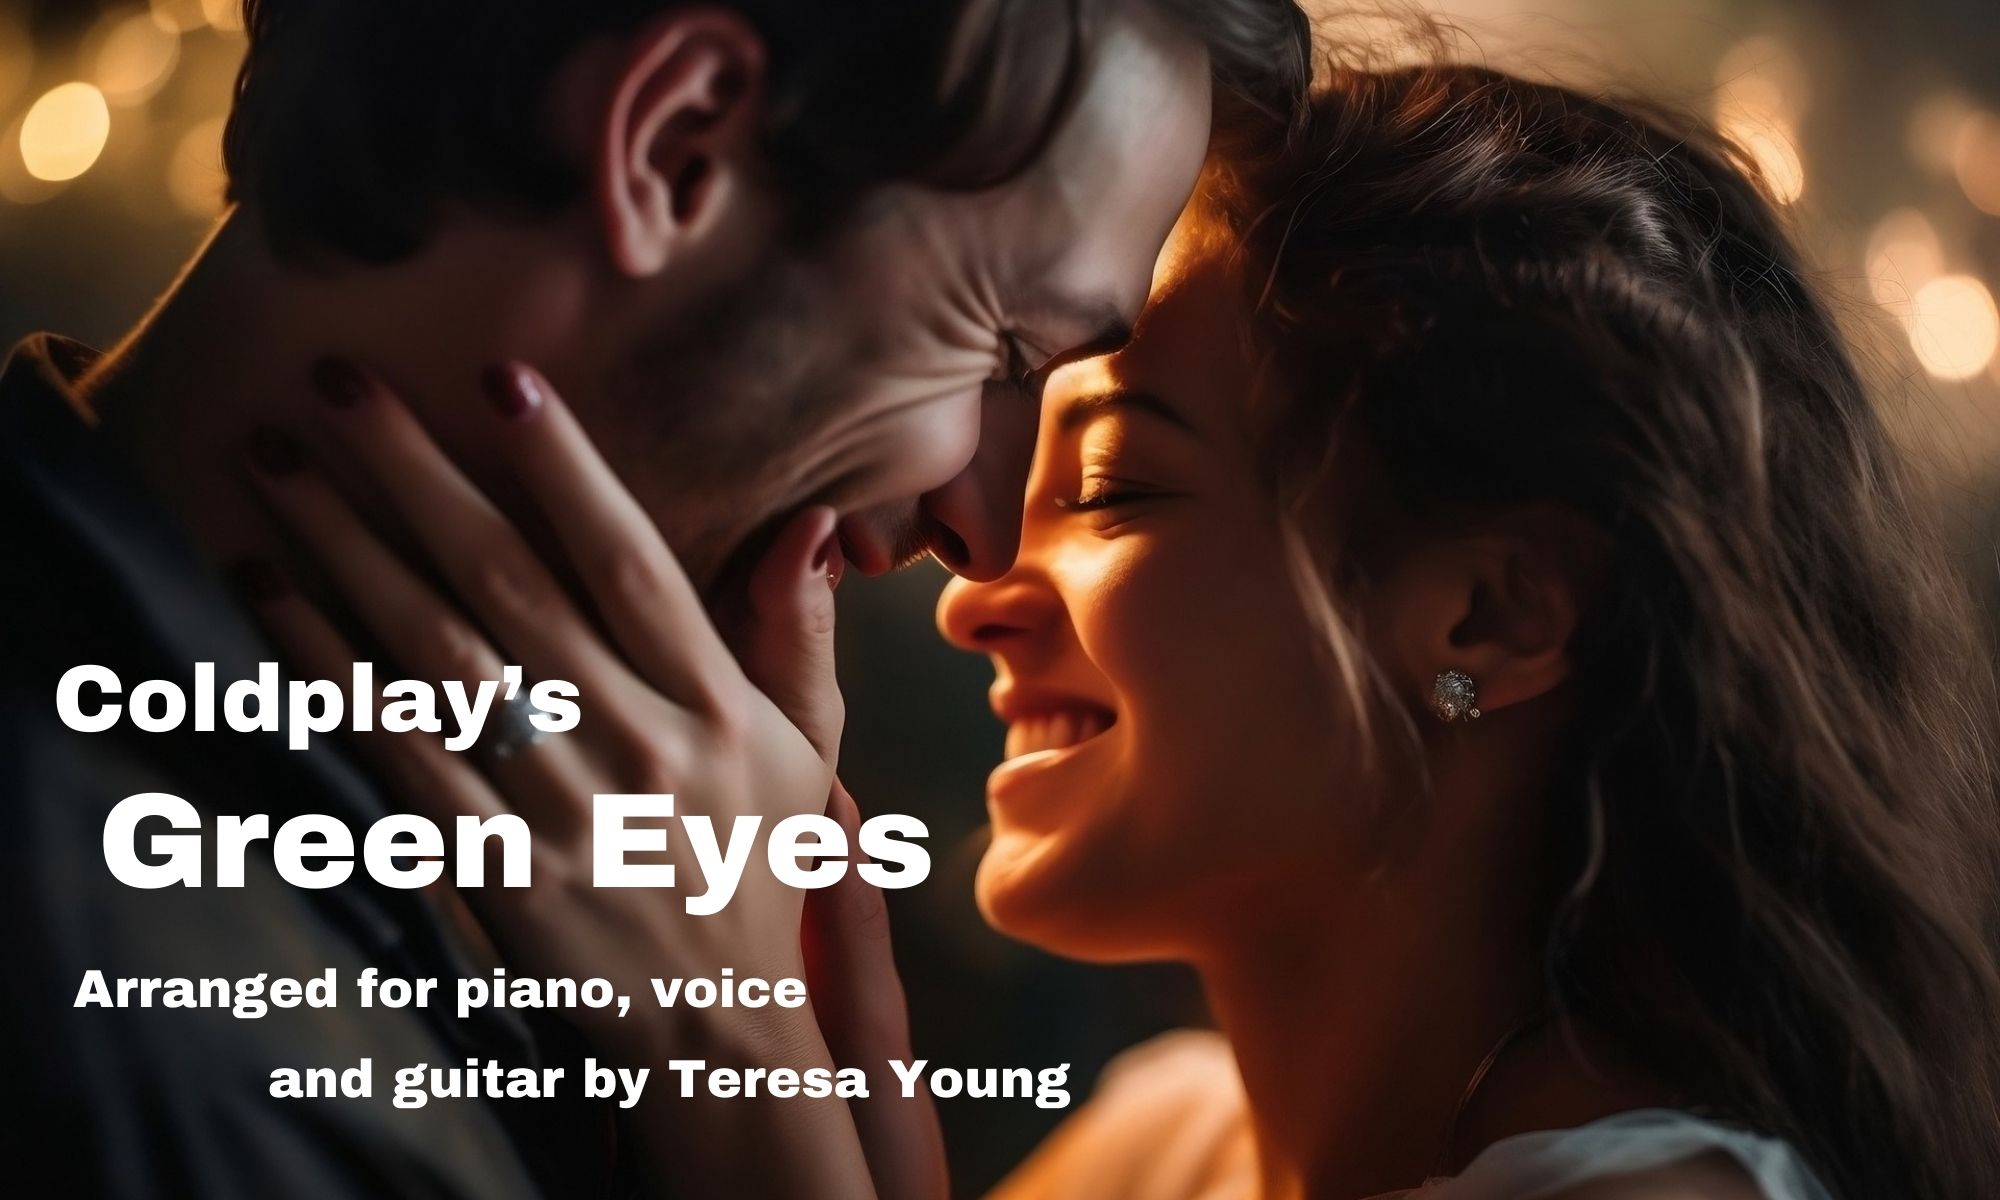 Coldplay's Green Eyes, arr. Teresa Young